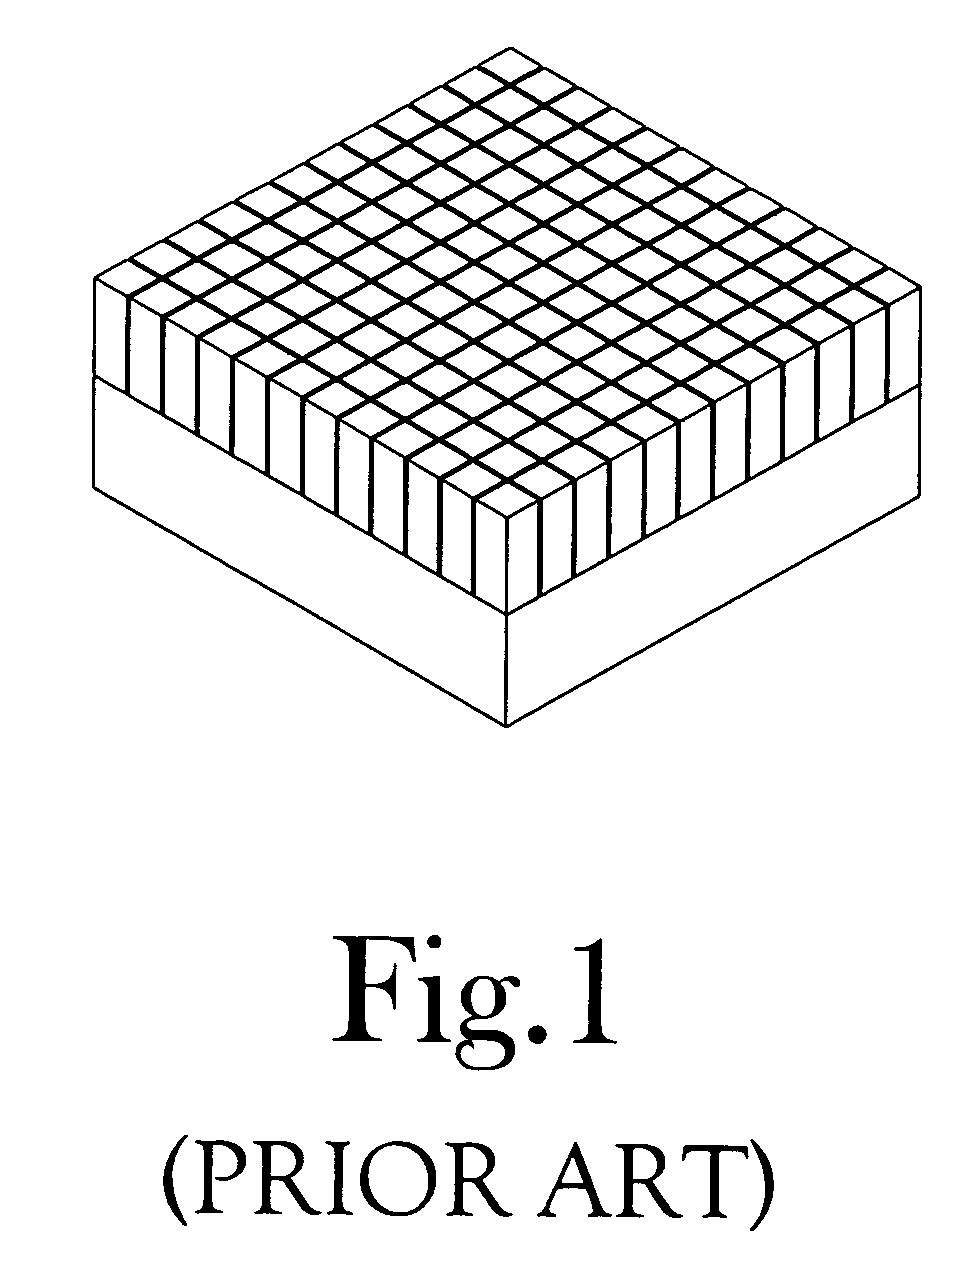 Method for producing a high resolution detector array